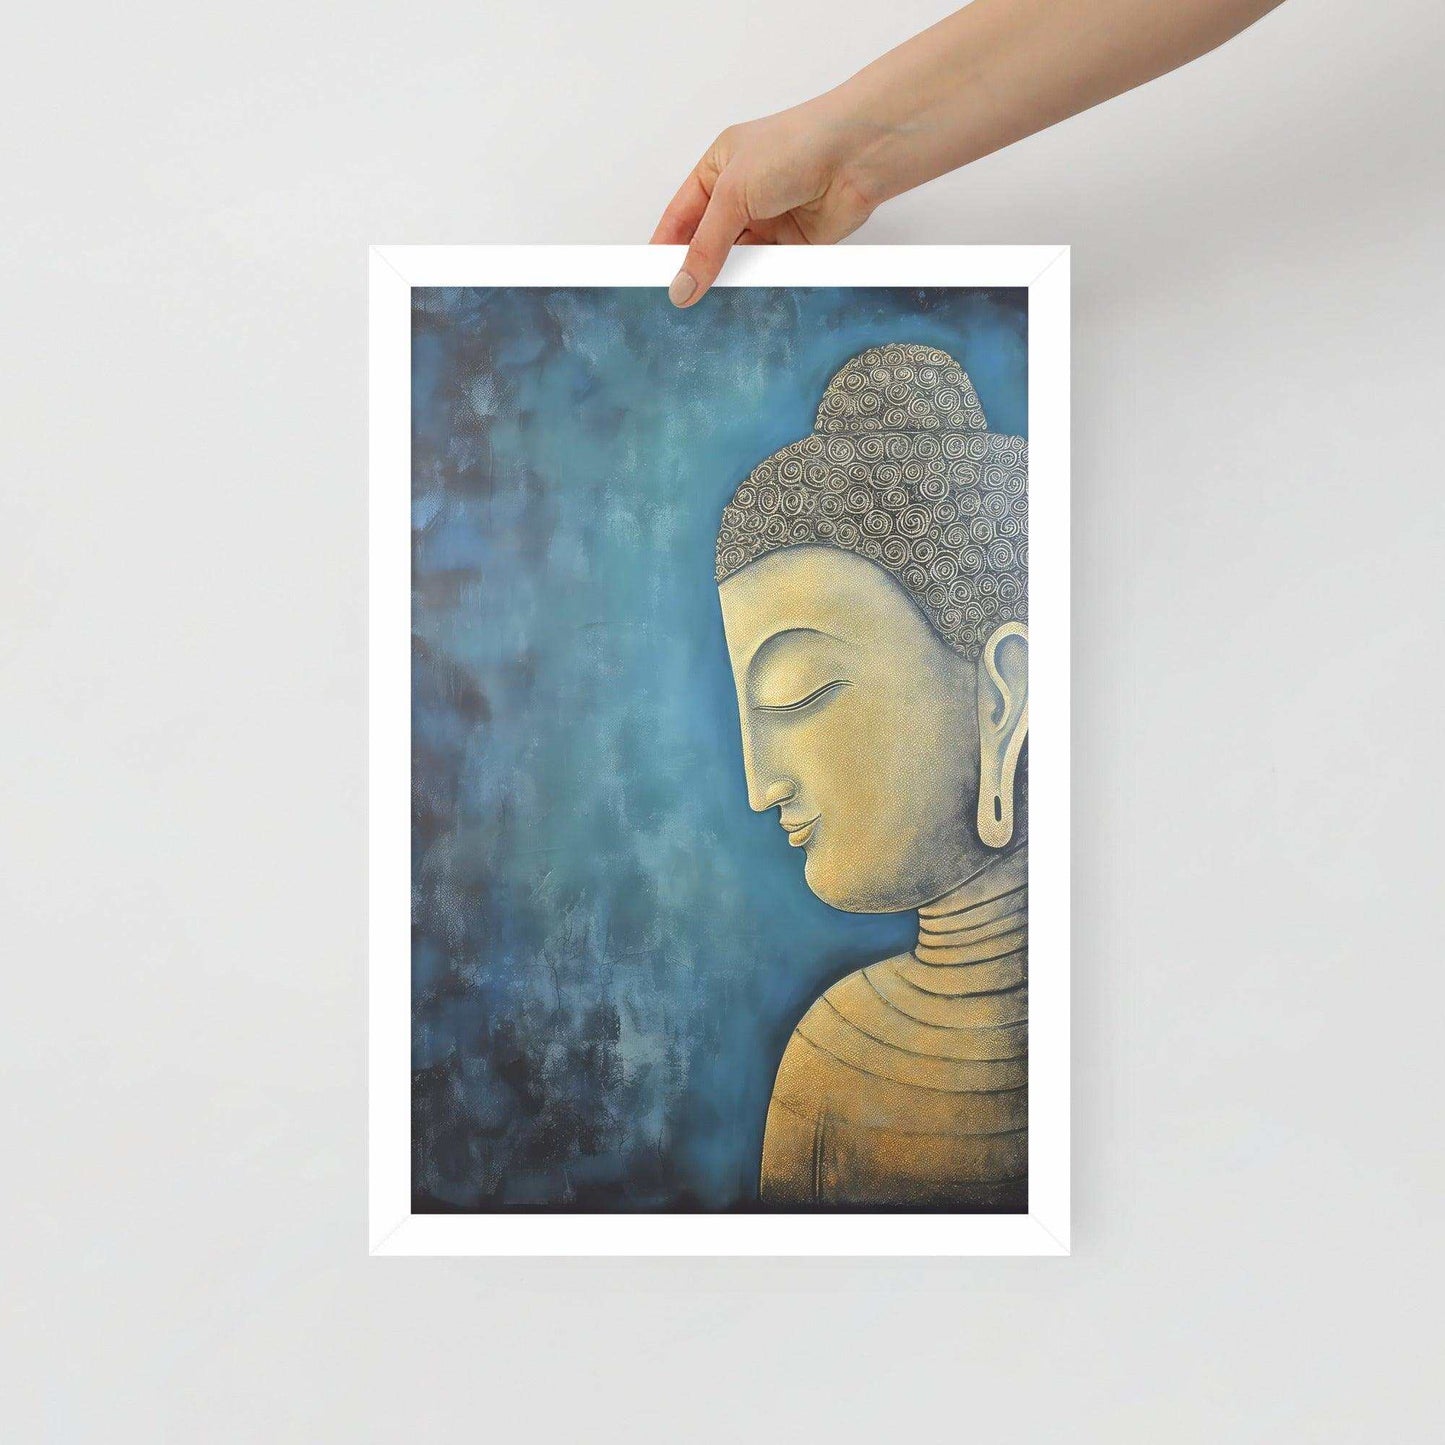 A hand is placing a framed poster on a white background, where a serene Golden Buddha Art with a patterned head and golden features is portrayed in profile against a mottled blue backdrop, all within a white oak frame.